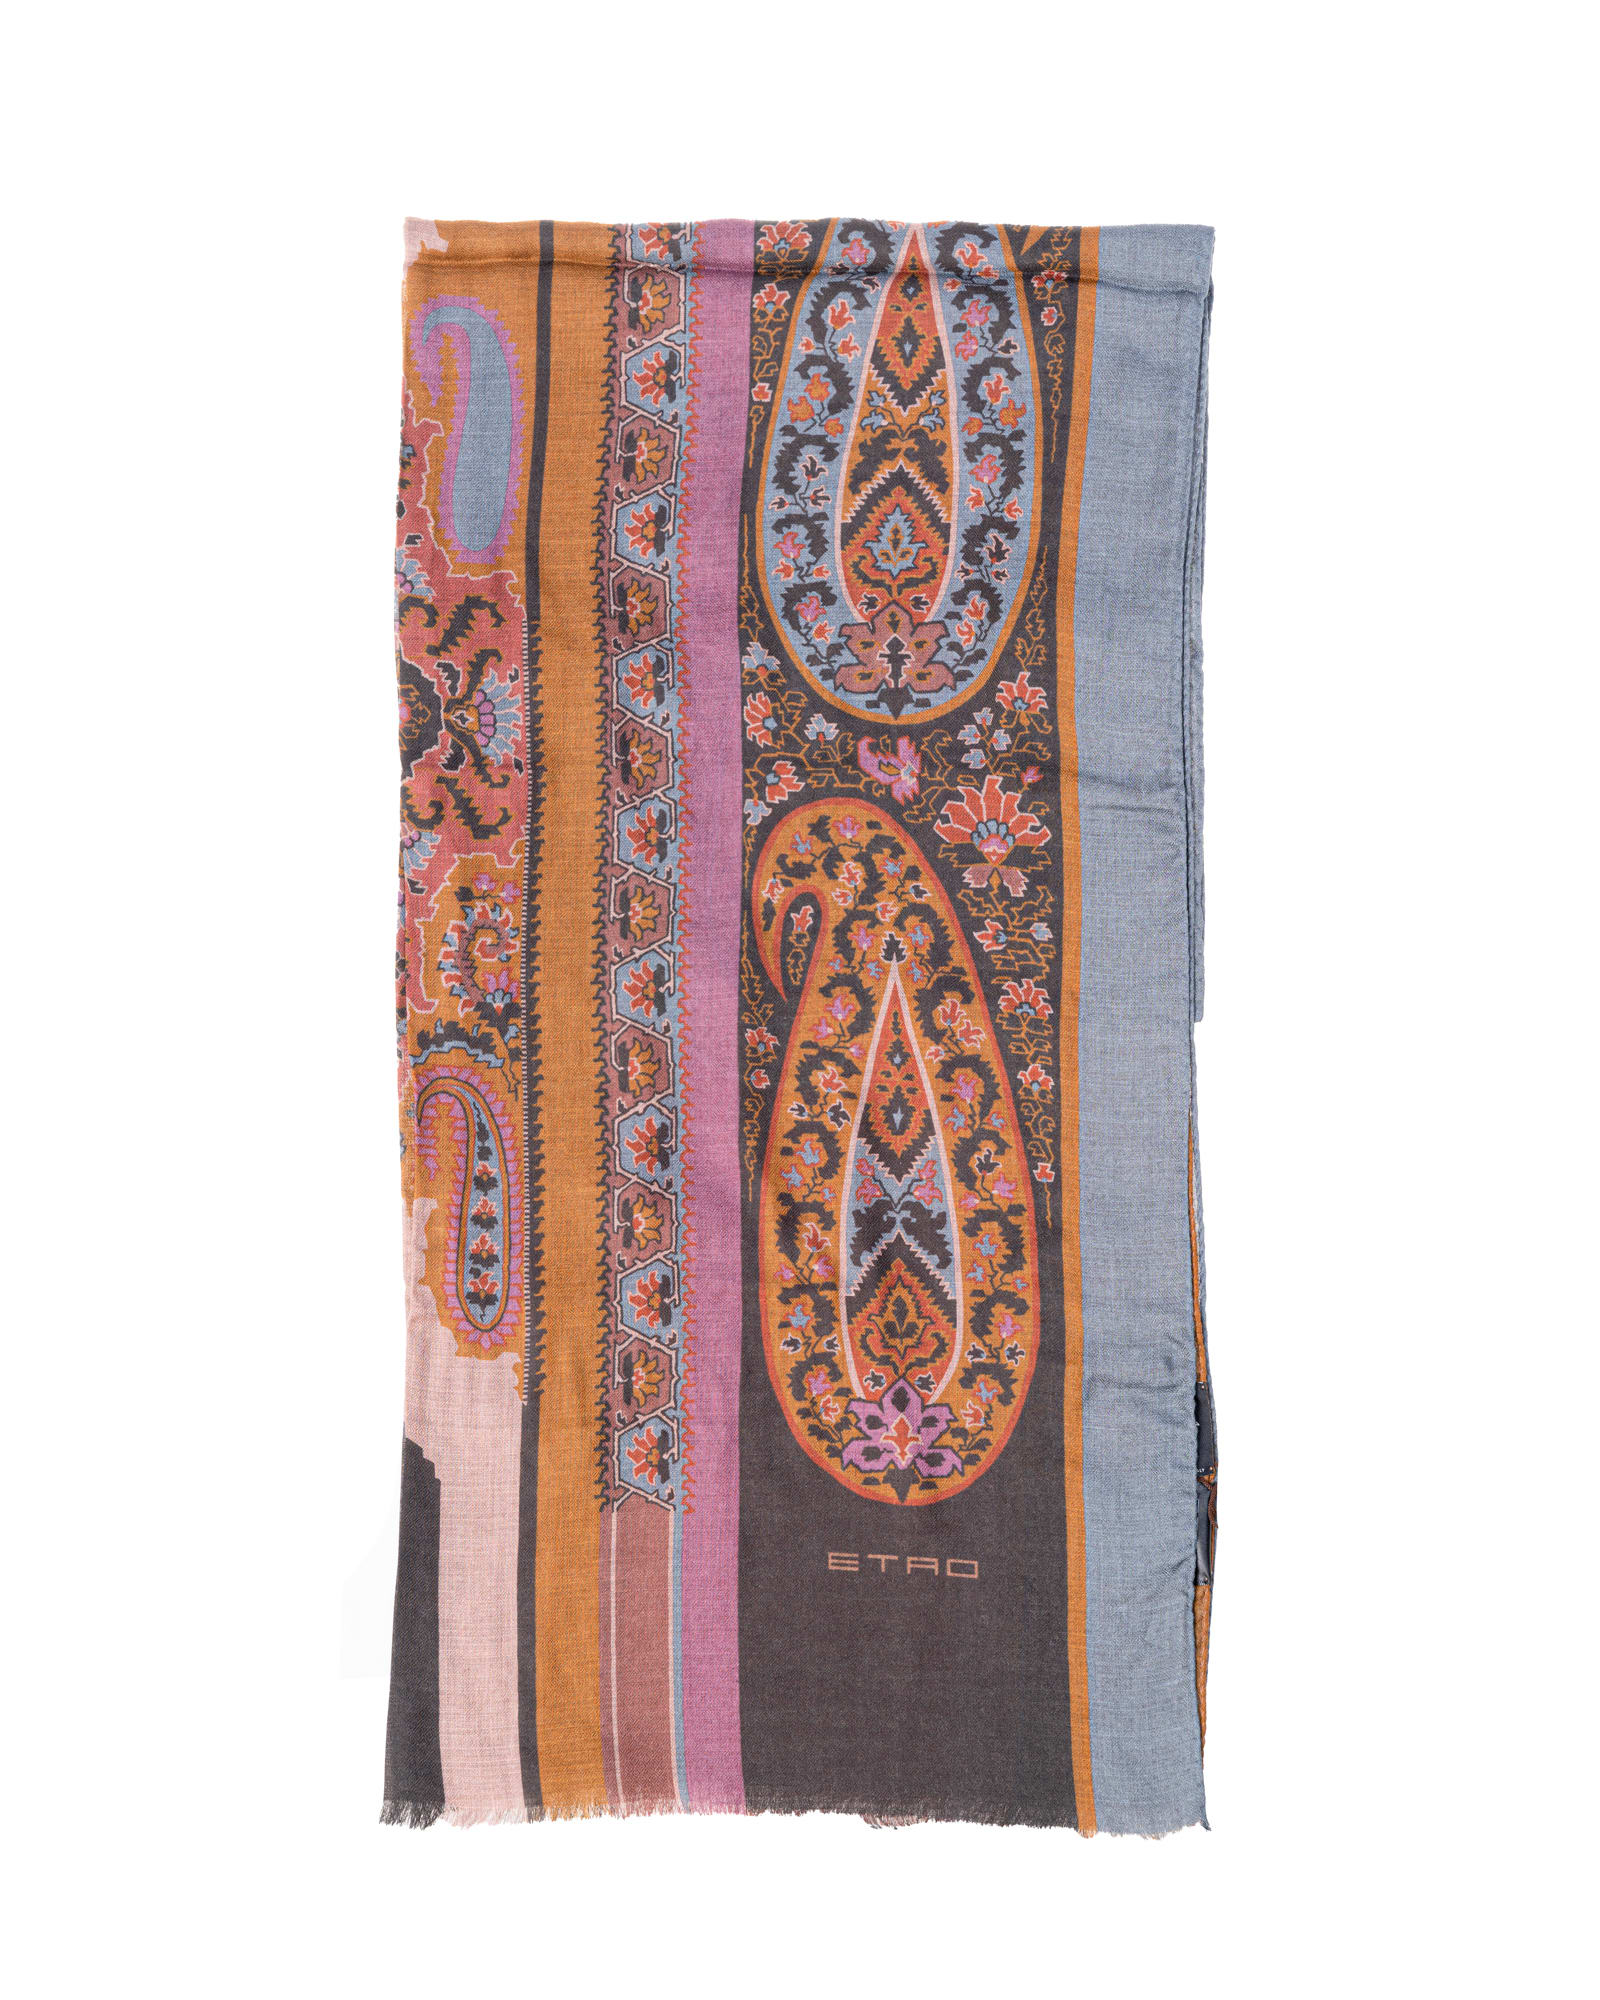 Etro Cashmere blend scarf decorated